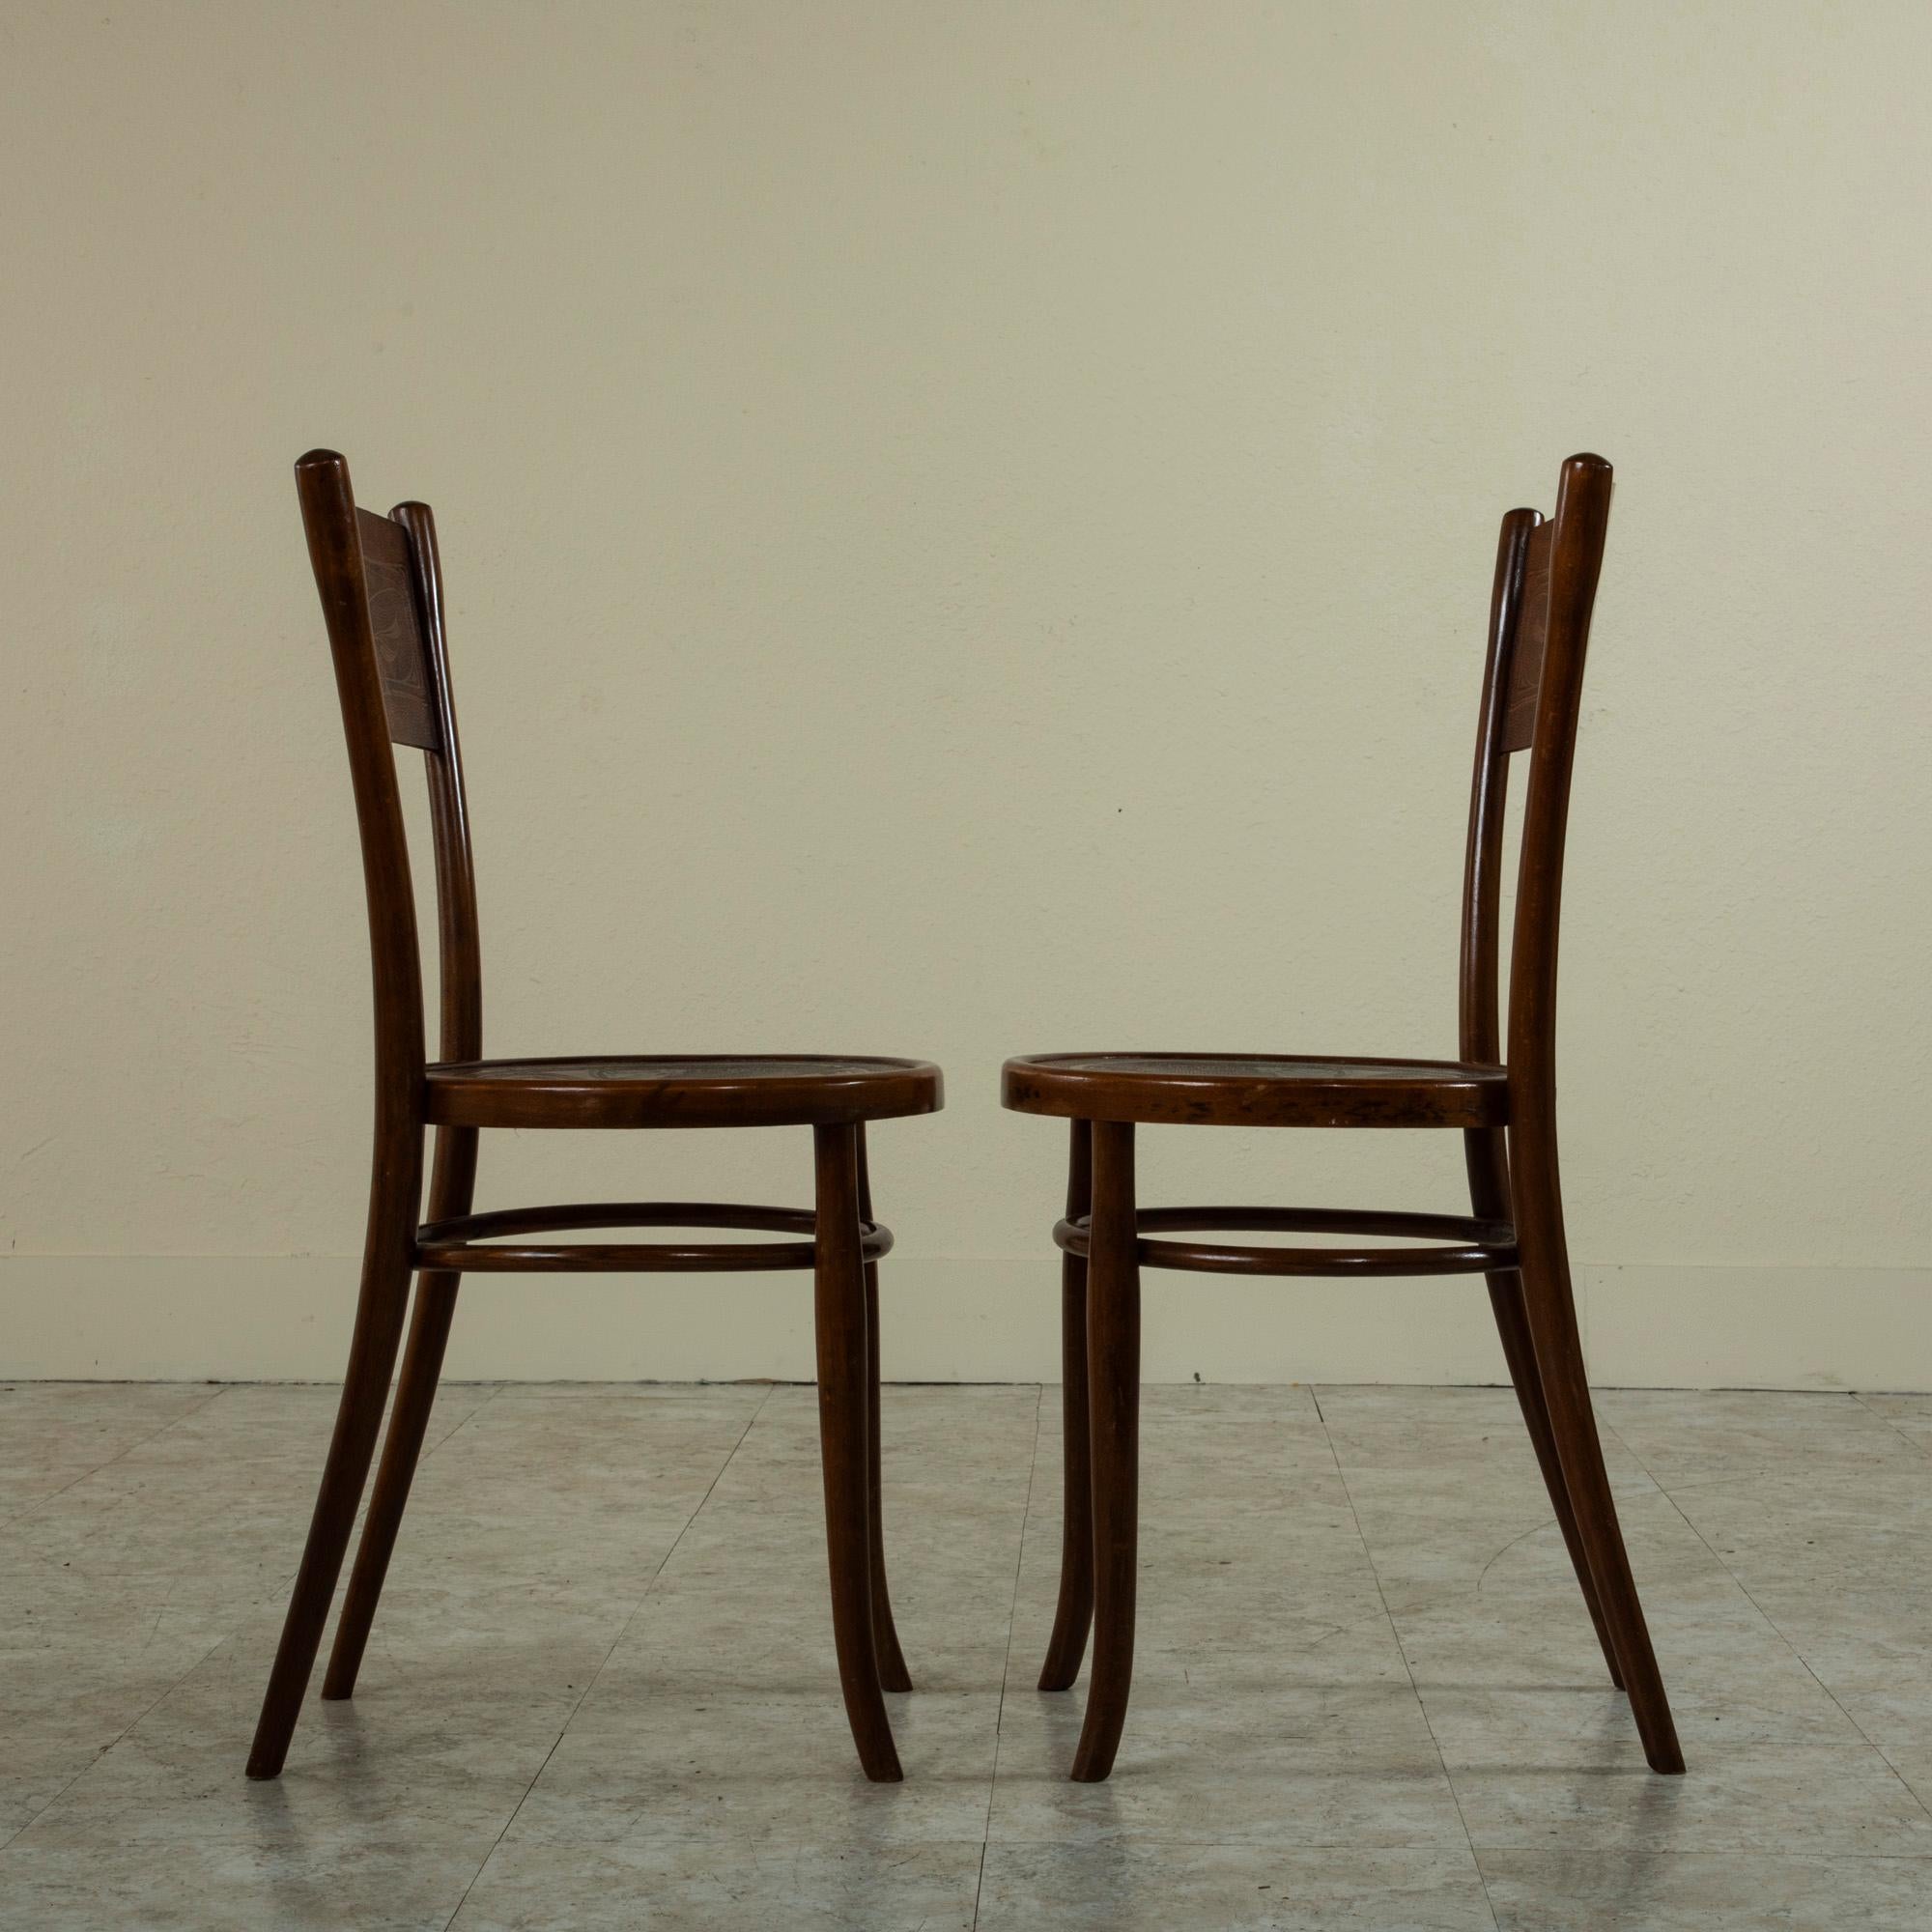 Early 20th Century Pair of French Art Nouveau Period Bentwood Bistro Chairs, Pressed Seats, c. 1900